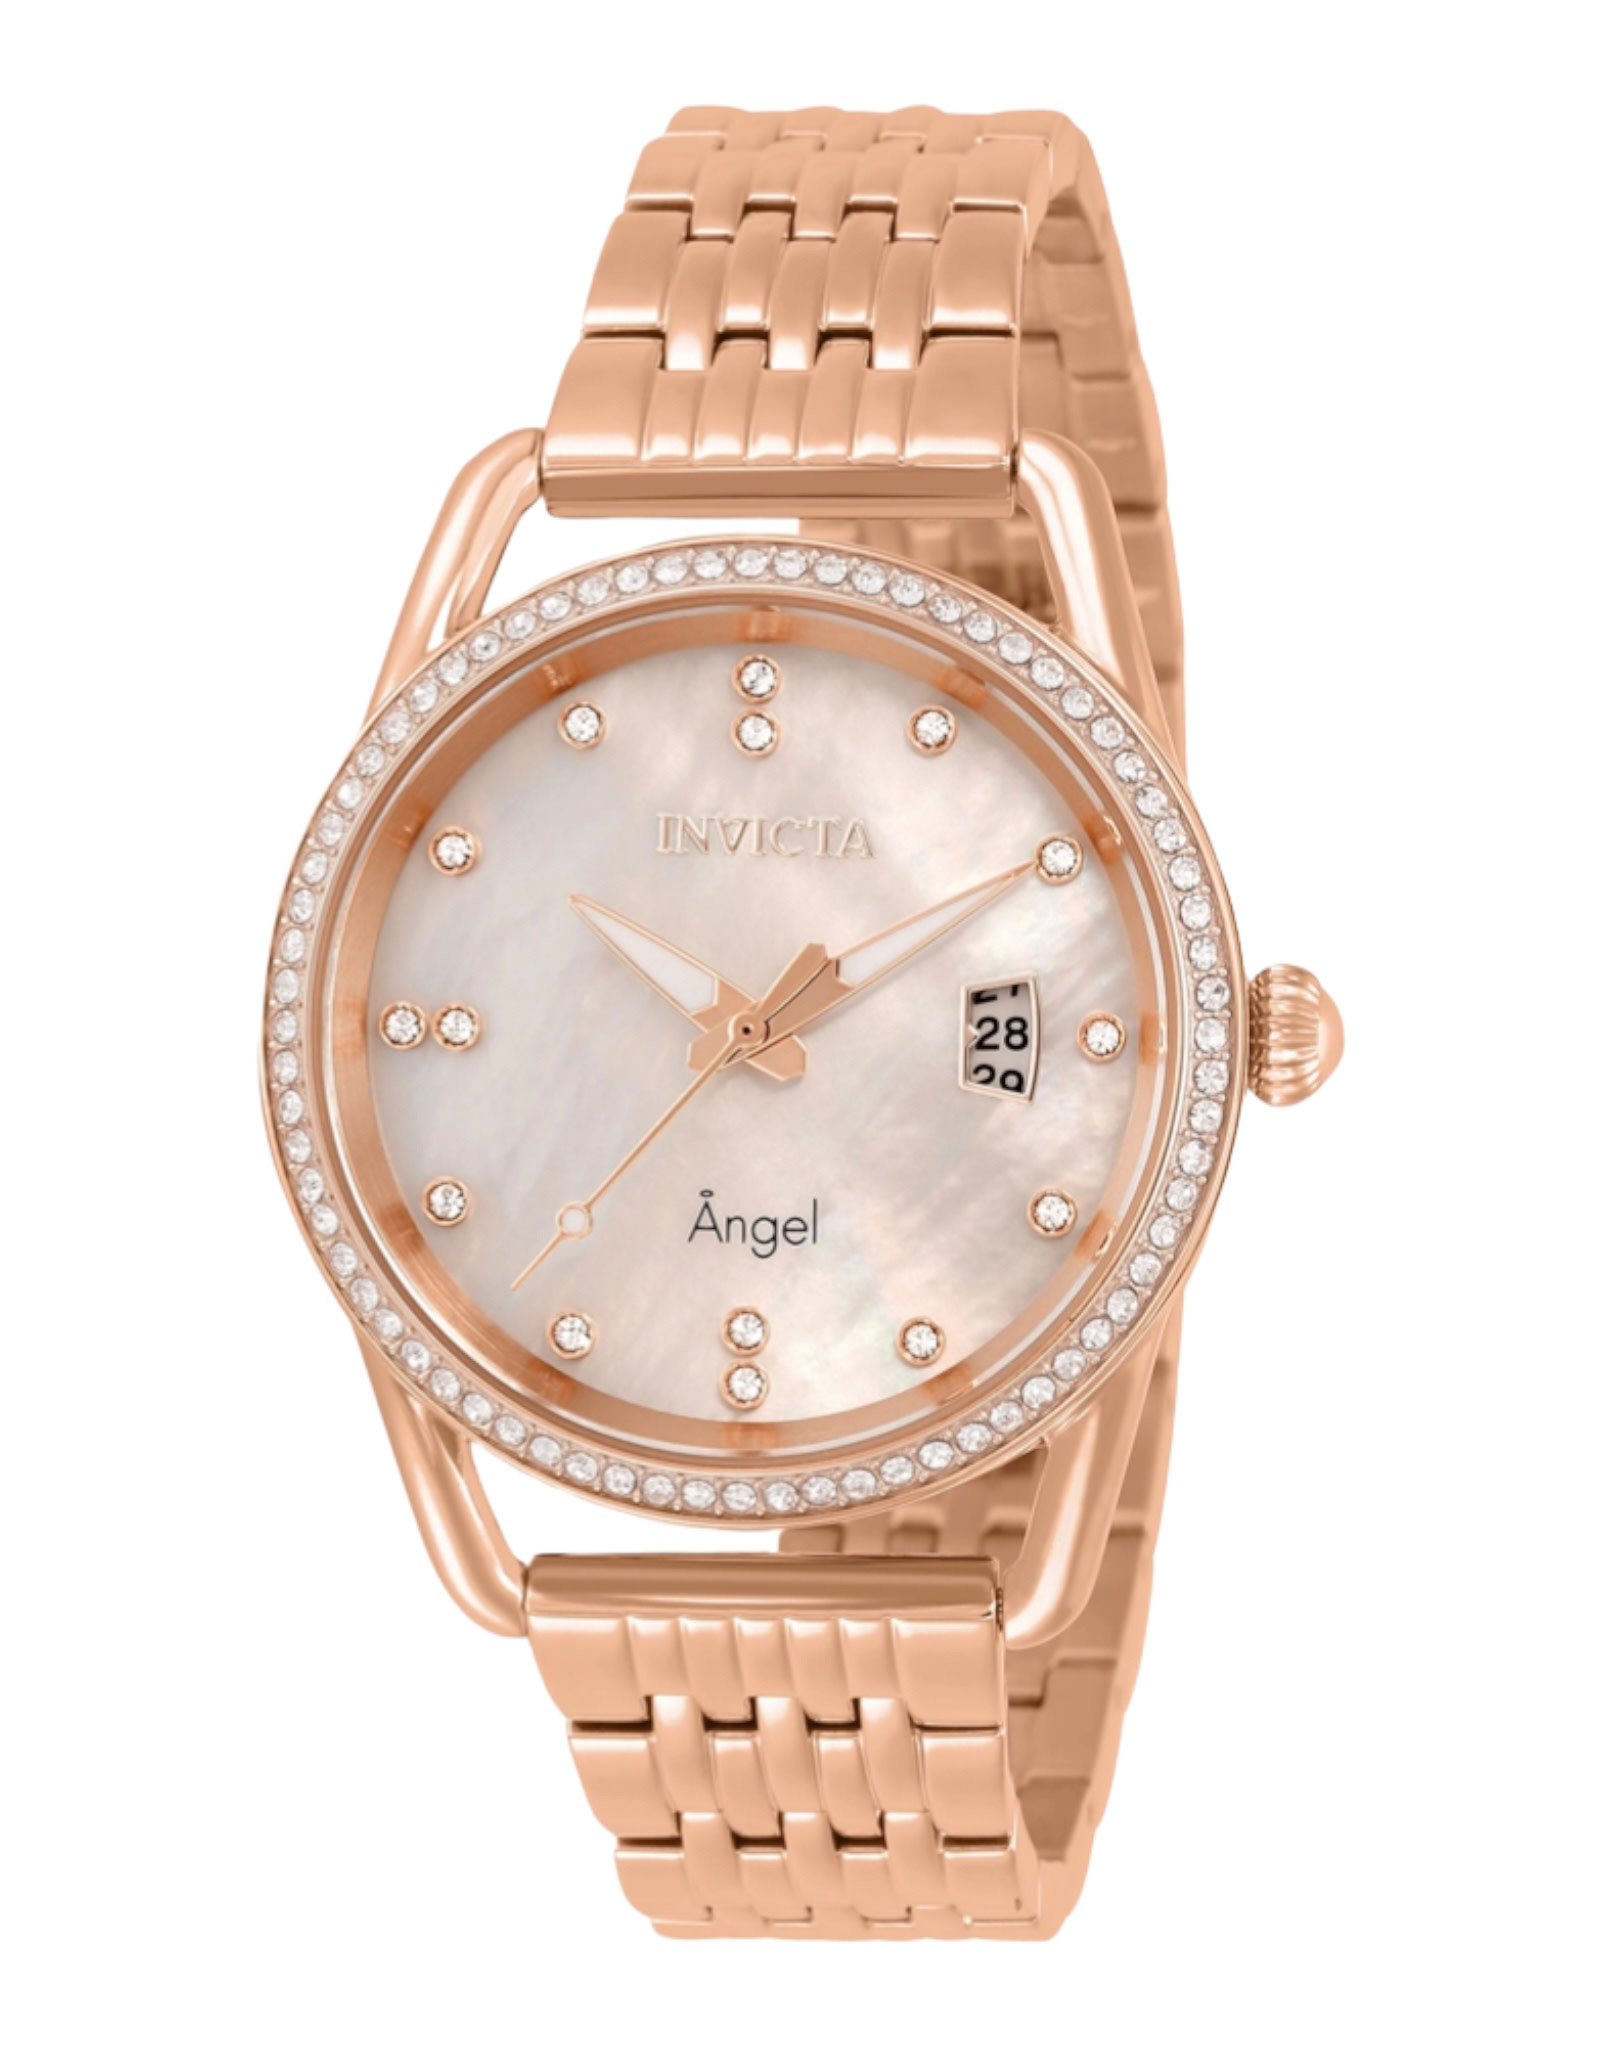 Invicta Invicta Angel Women’s Watch w/ Mother of Pearl Dial 37mm, Quartz, Gold Case & Gold Stainless Steel Band , 50m Water Resistant